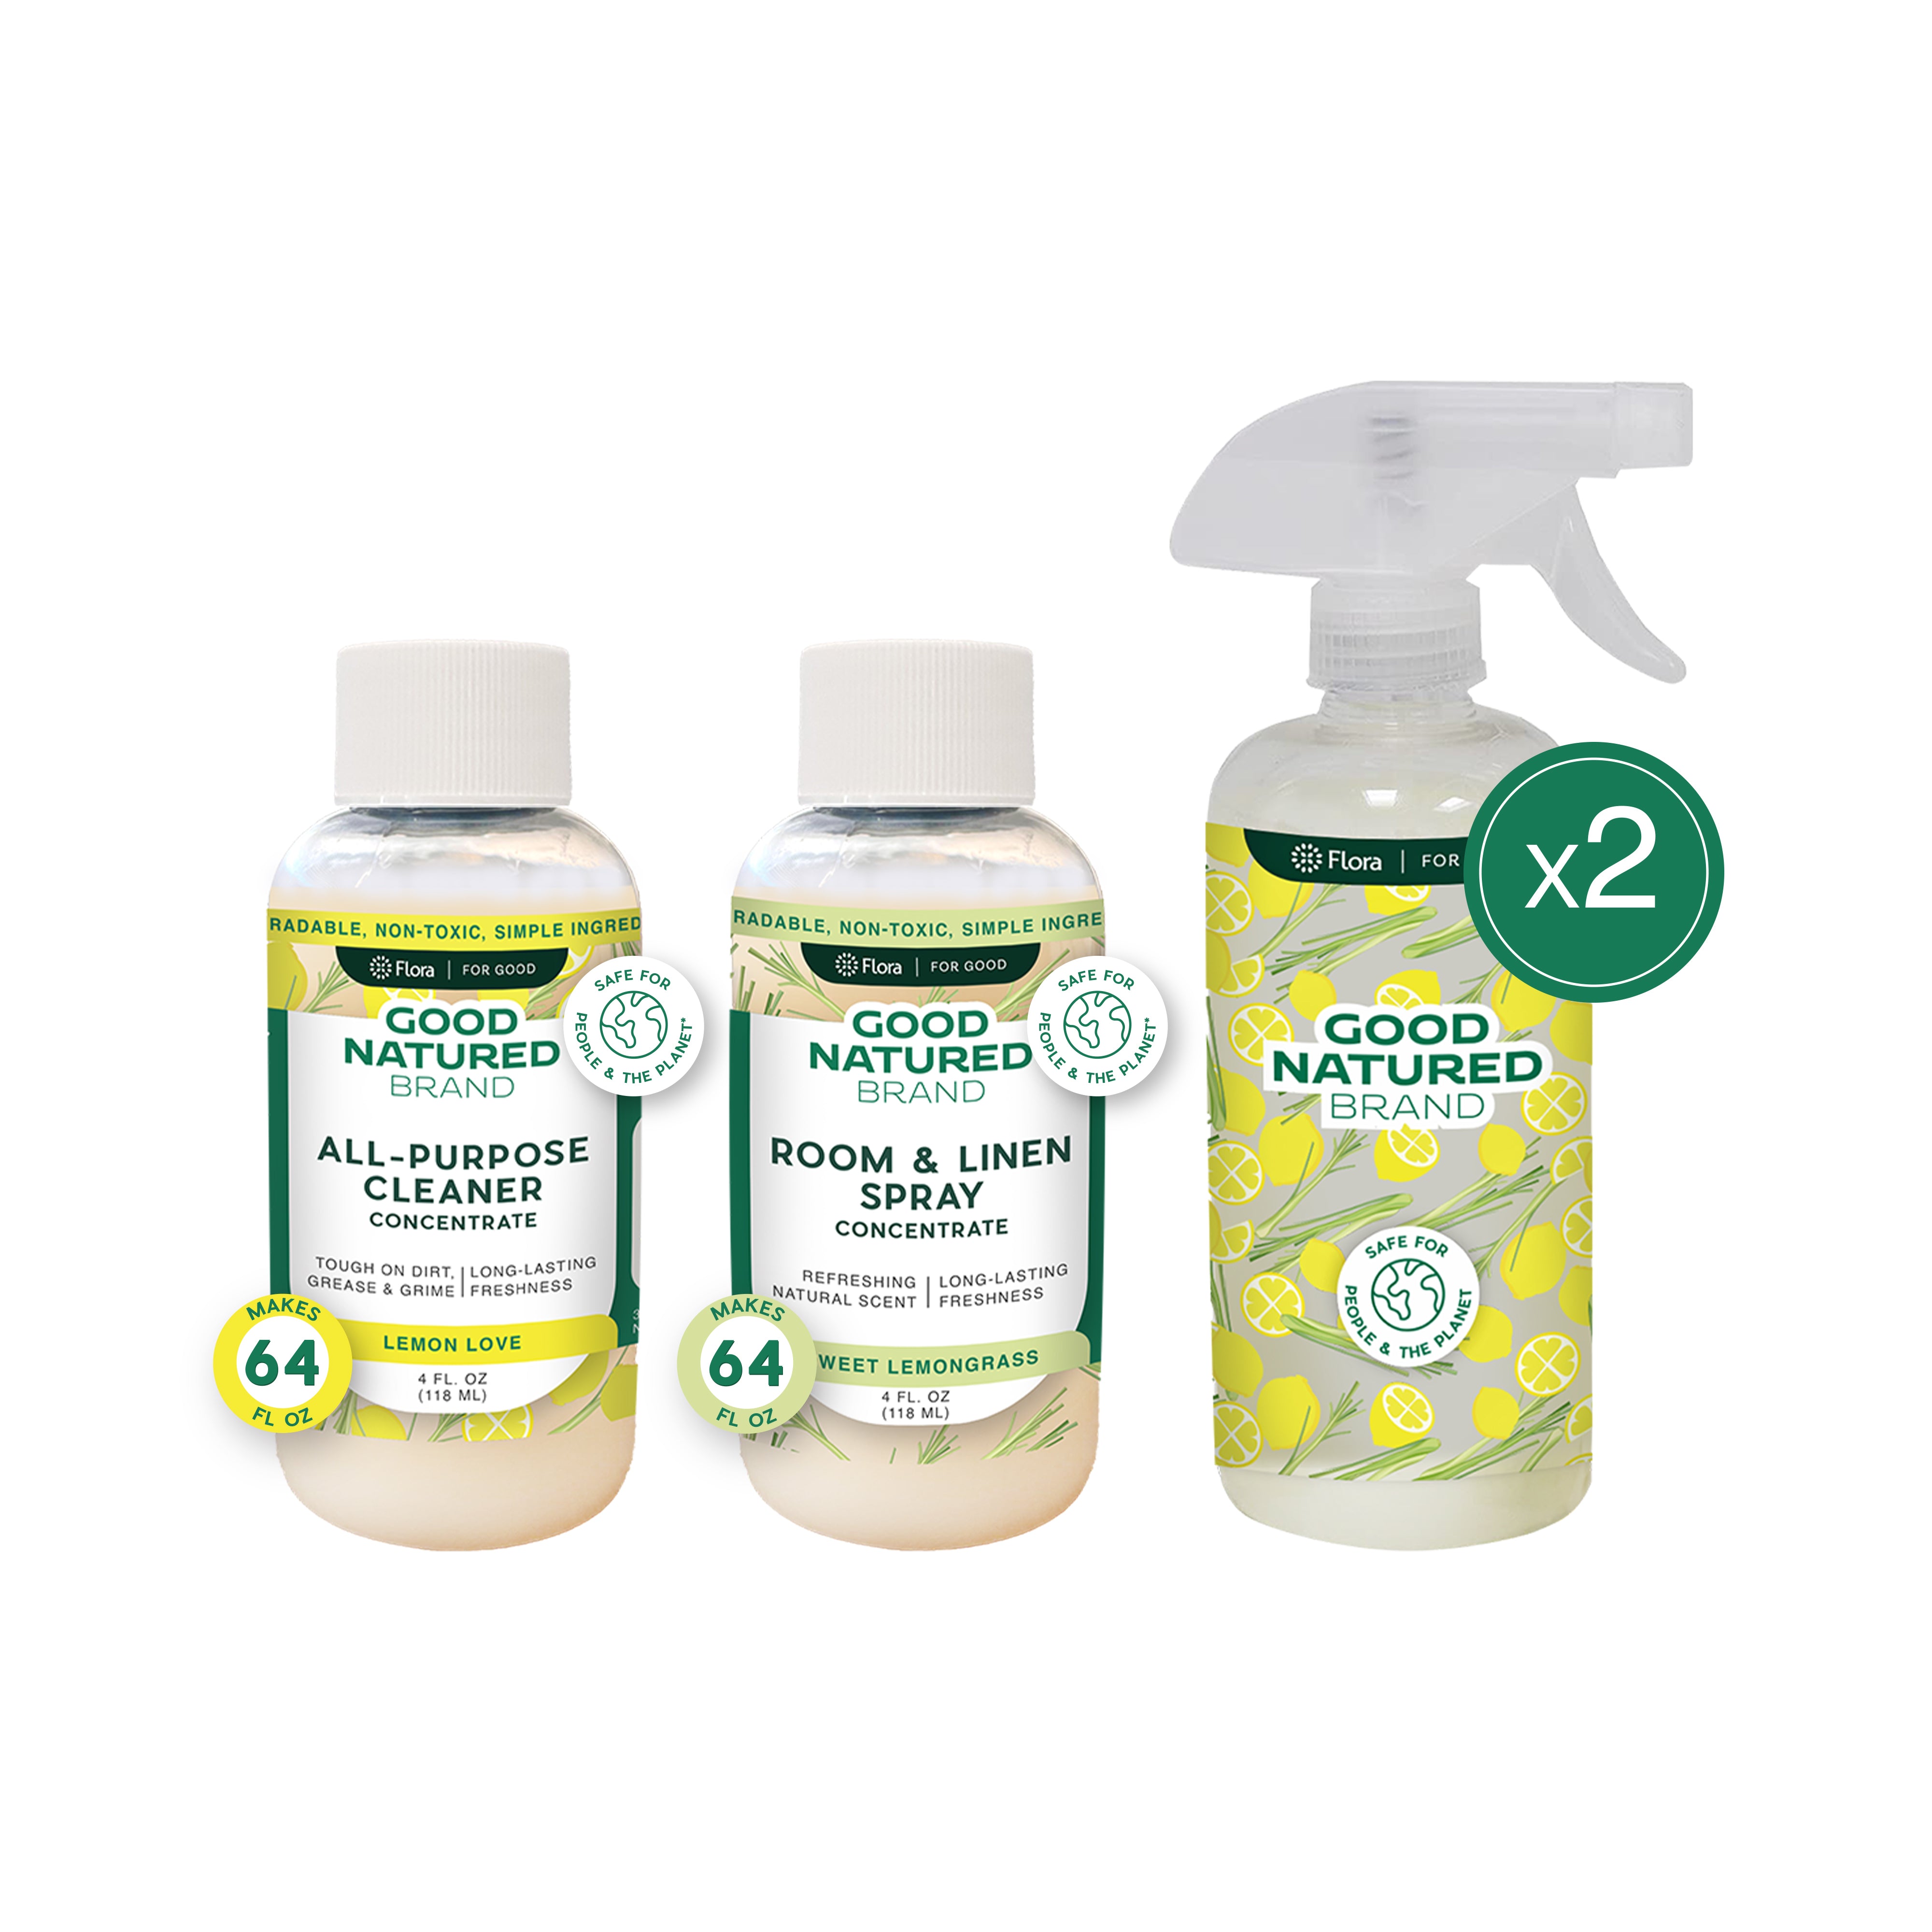 Clean & Refresh Duo | All-Purpose Cleaner, Room & Linen Spray